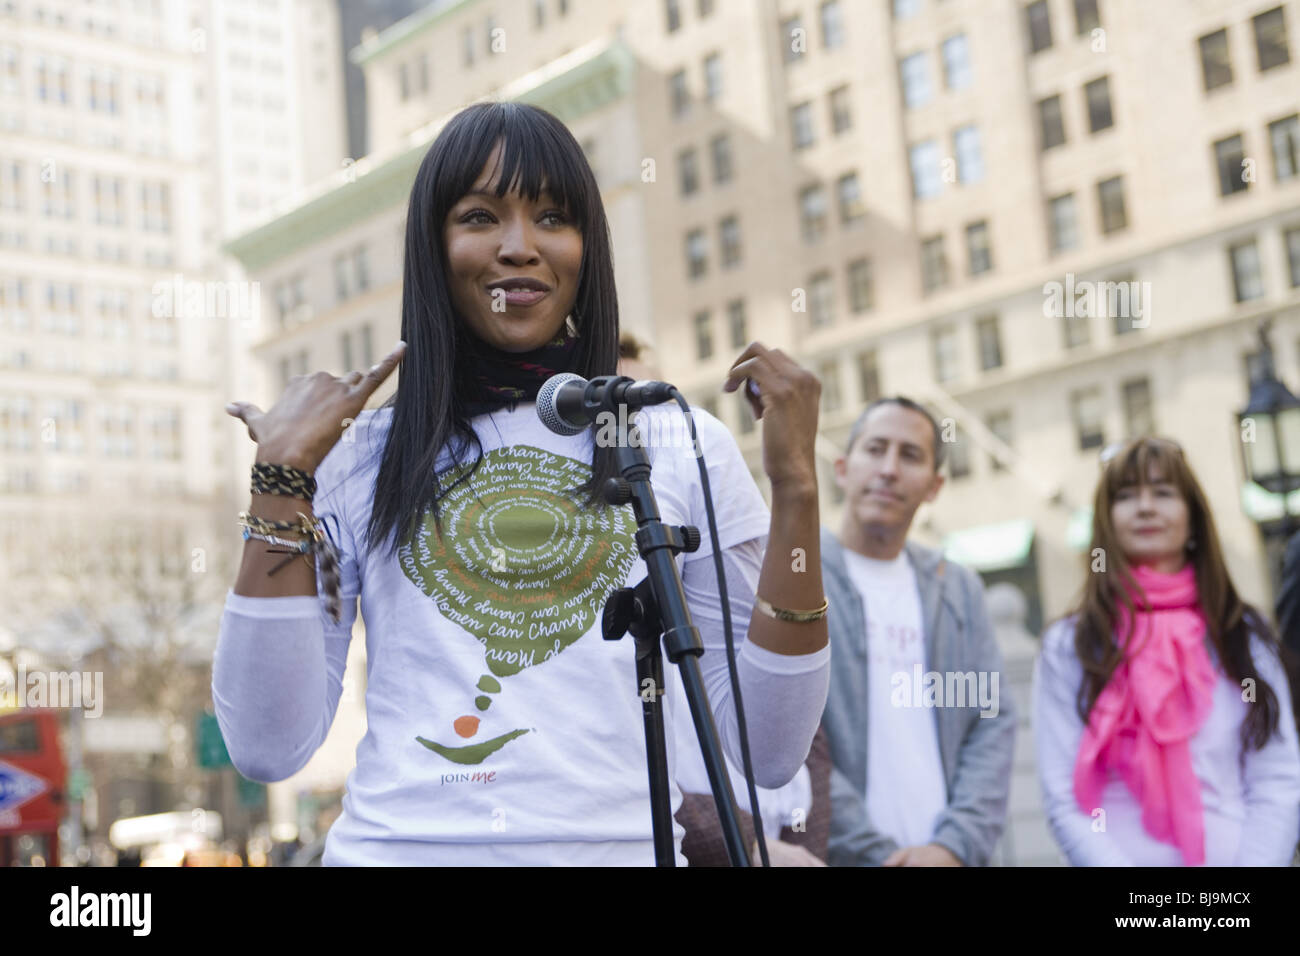 Supermodel Naomi Campbell speaks at an International Women's Day celebration in City Hall Park in New York City in 2010. Stock Photo